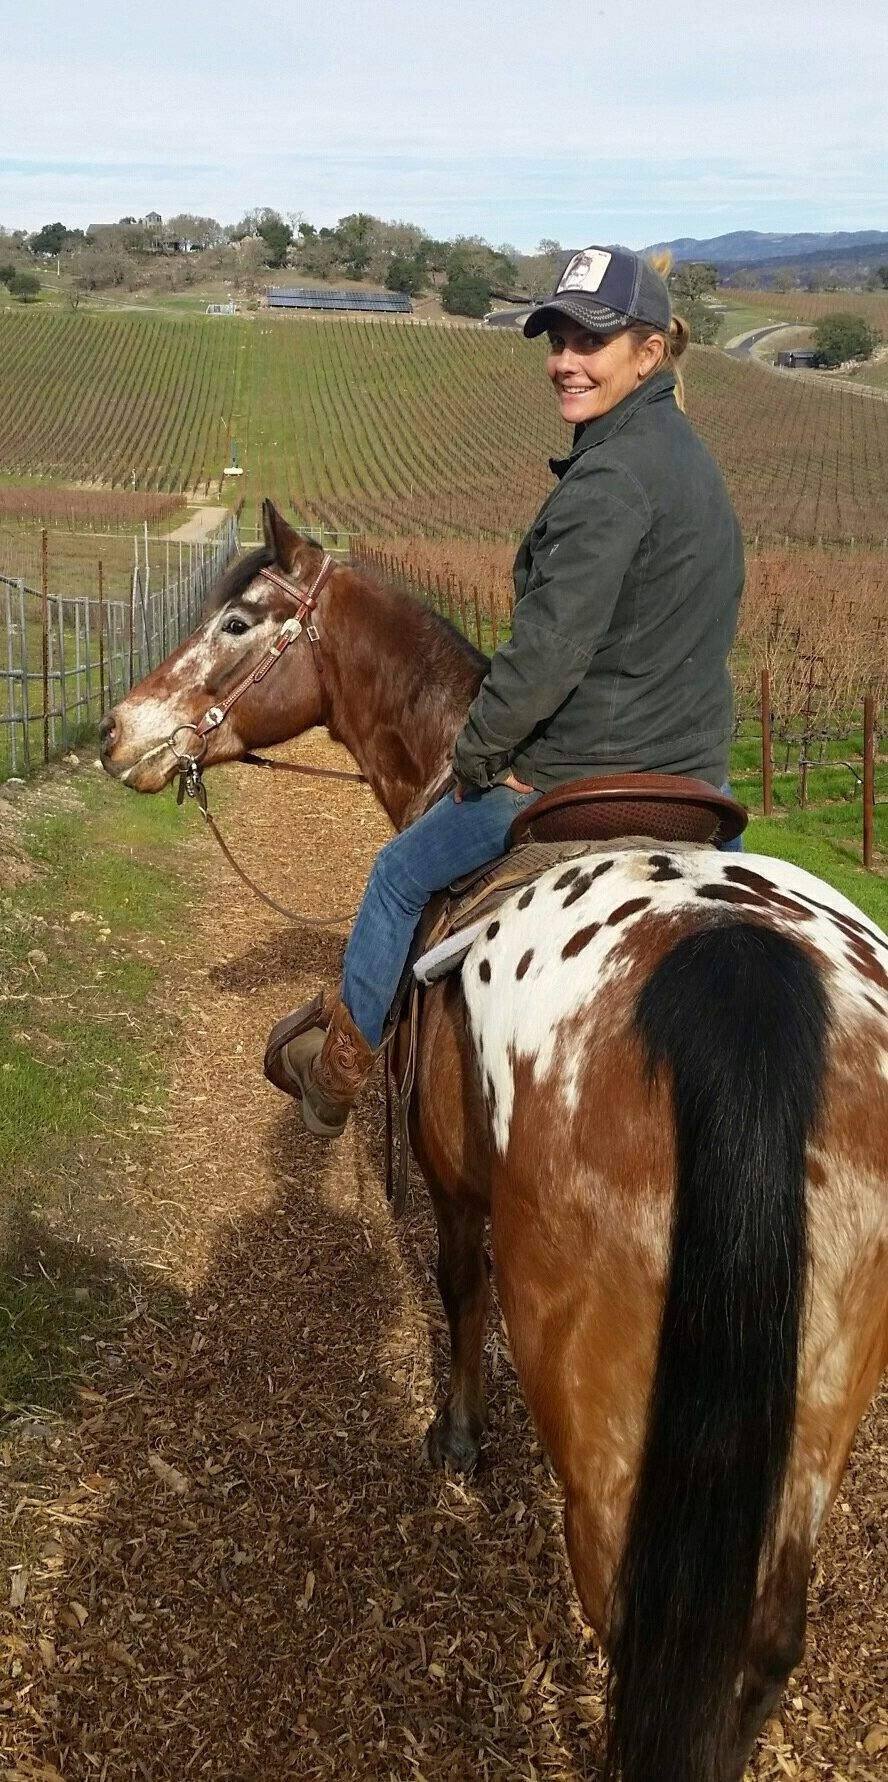 Michelle Rogers has launched Sonoma Valley Trail Rides.